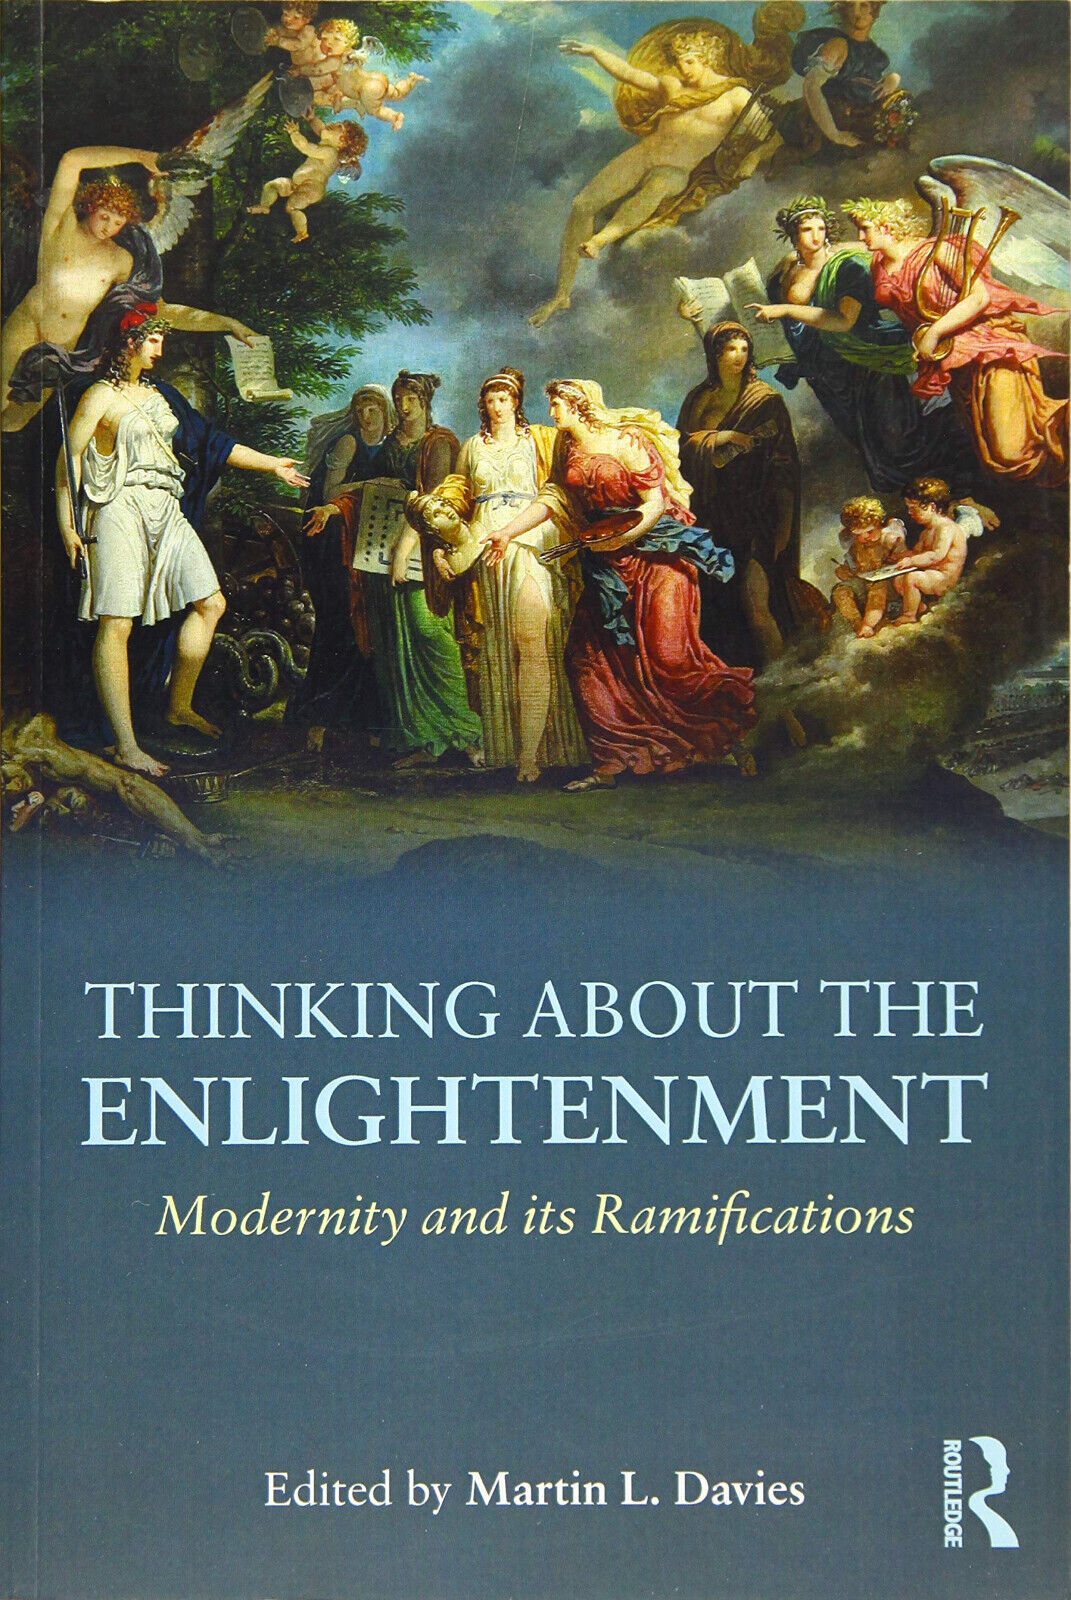 Thinking about the Enlightenment - Martin L. Davies - Routledge, 2016 libro usato